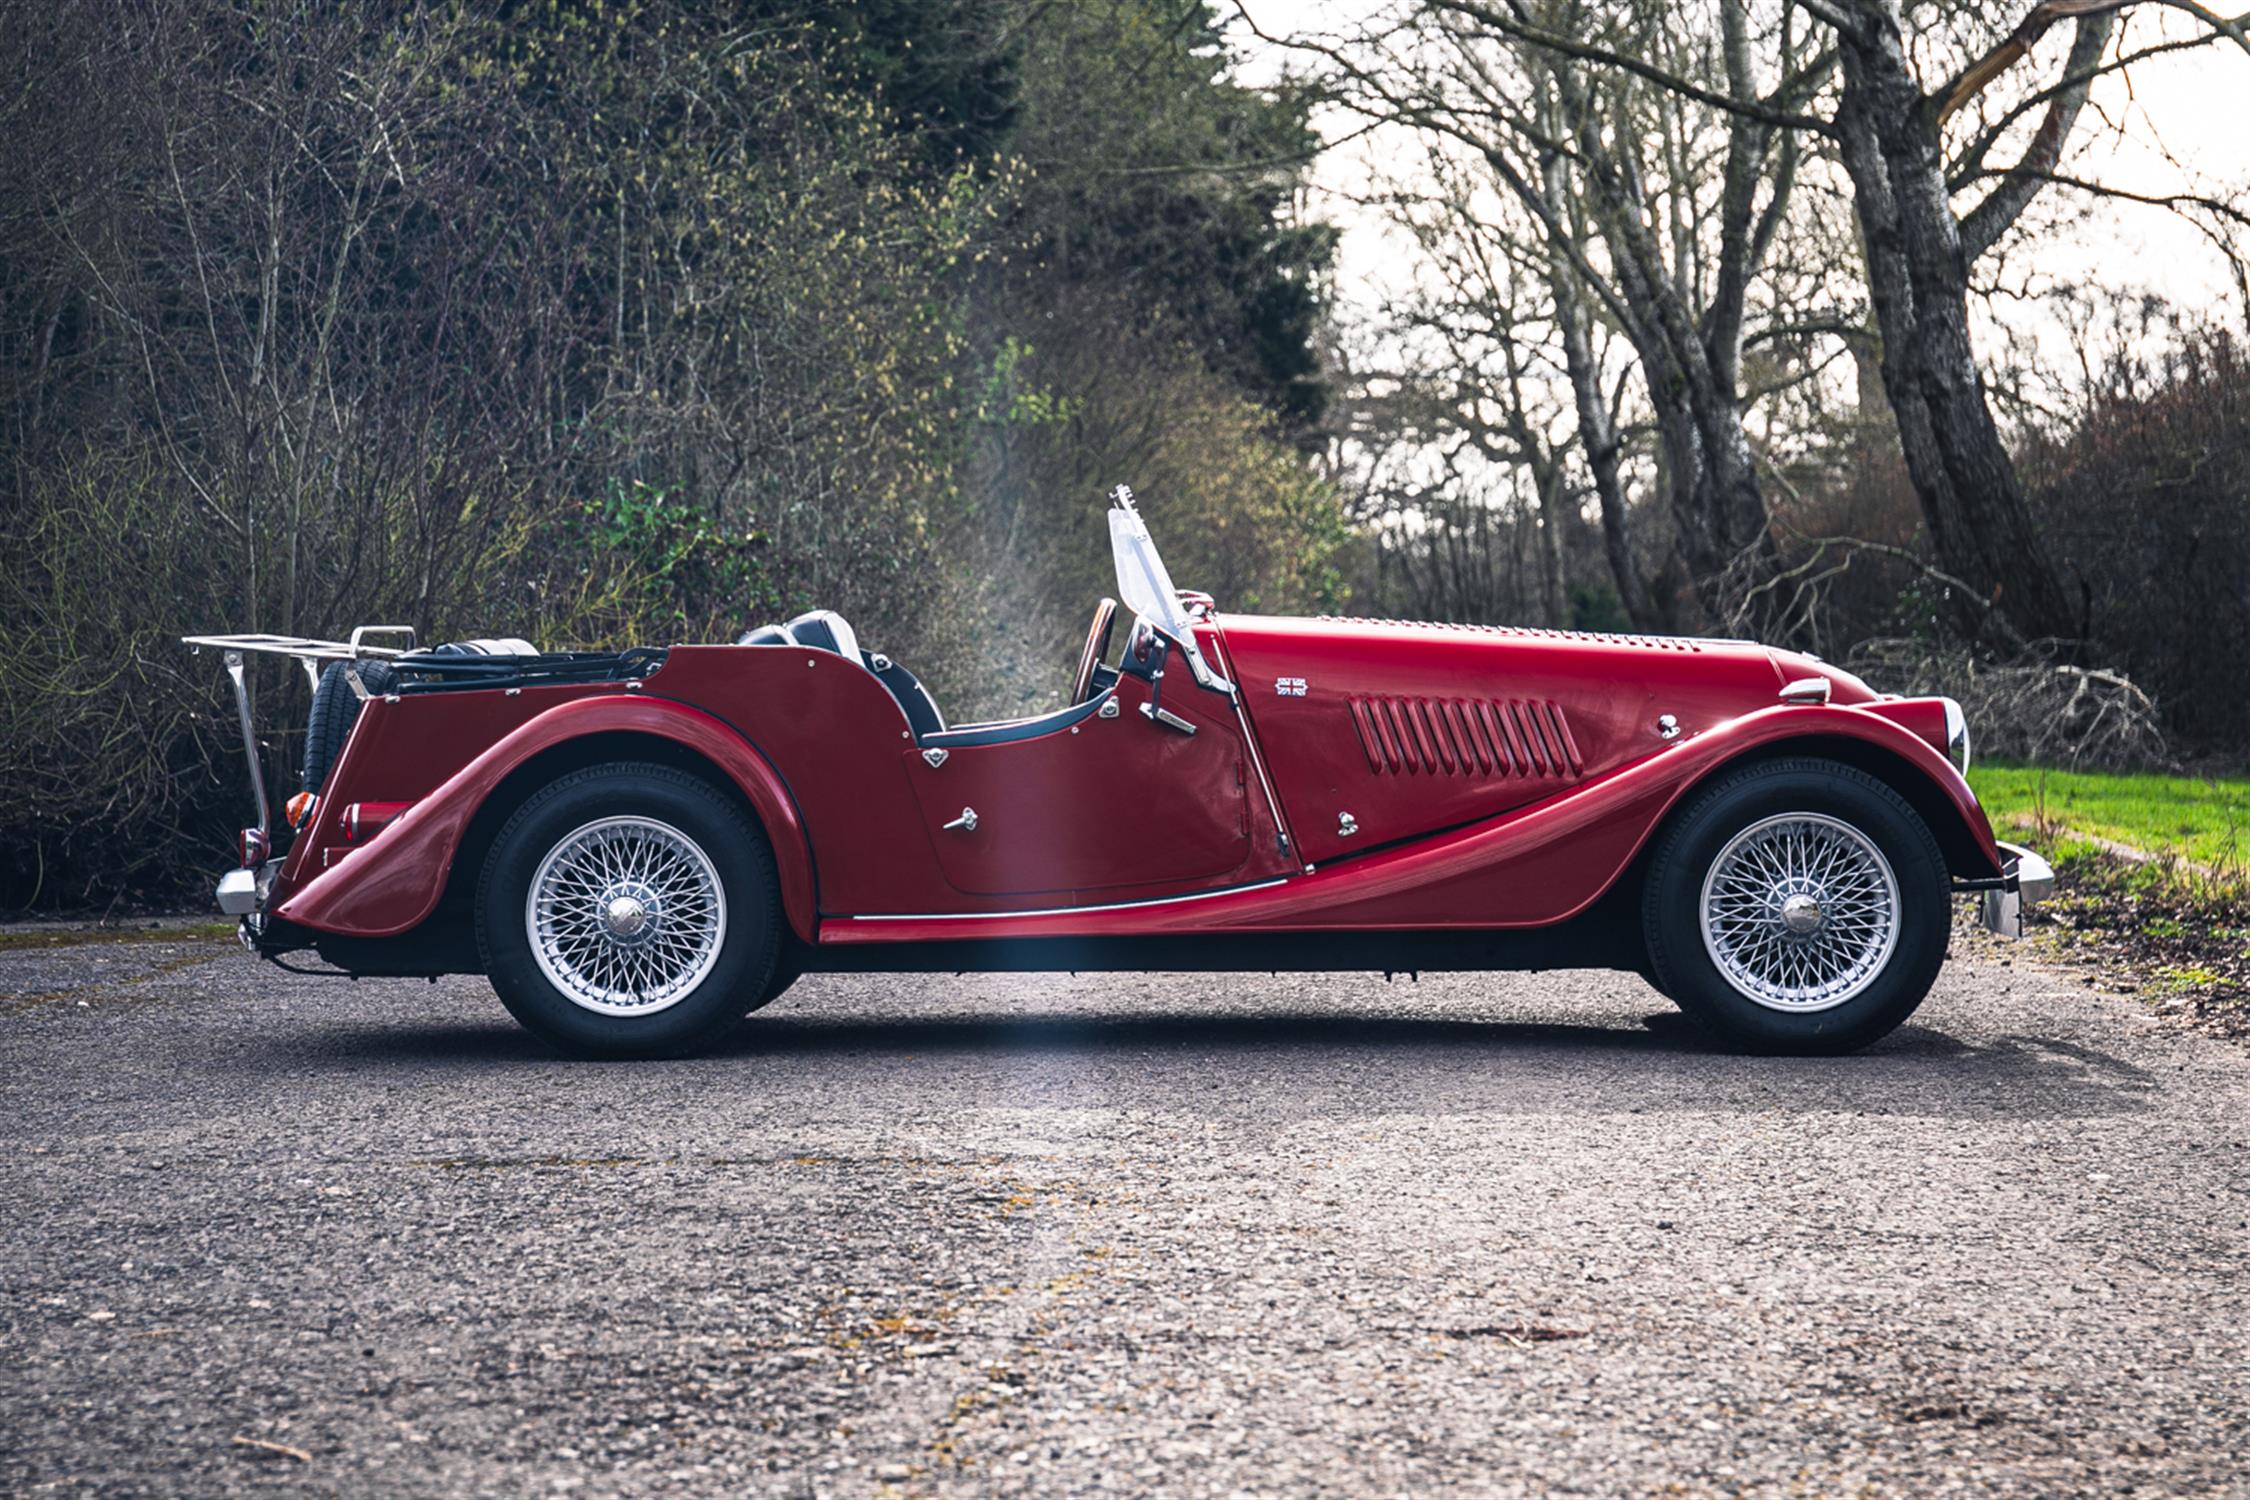 1986 Morgan 4/4 1600 (Four-Seater) - Image 13 of 20